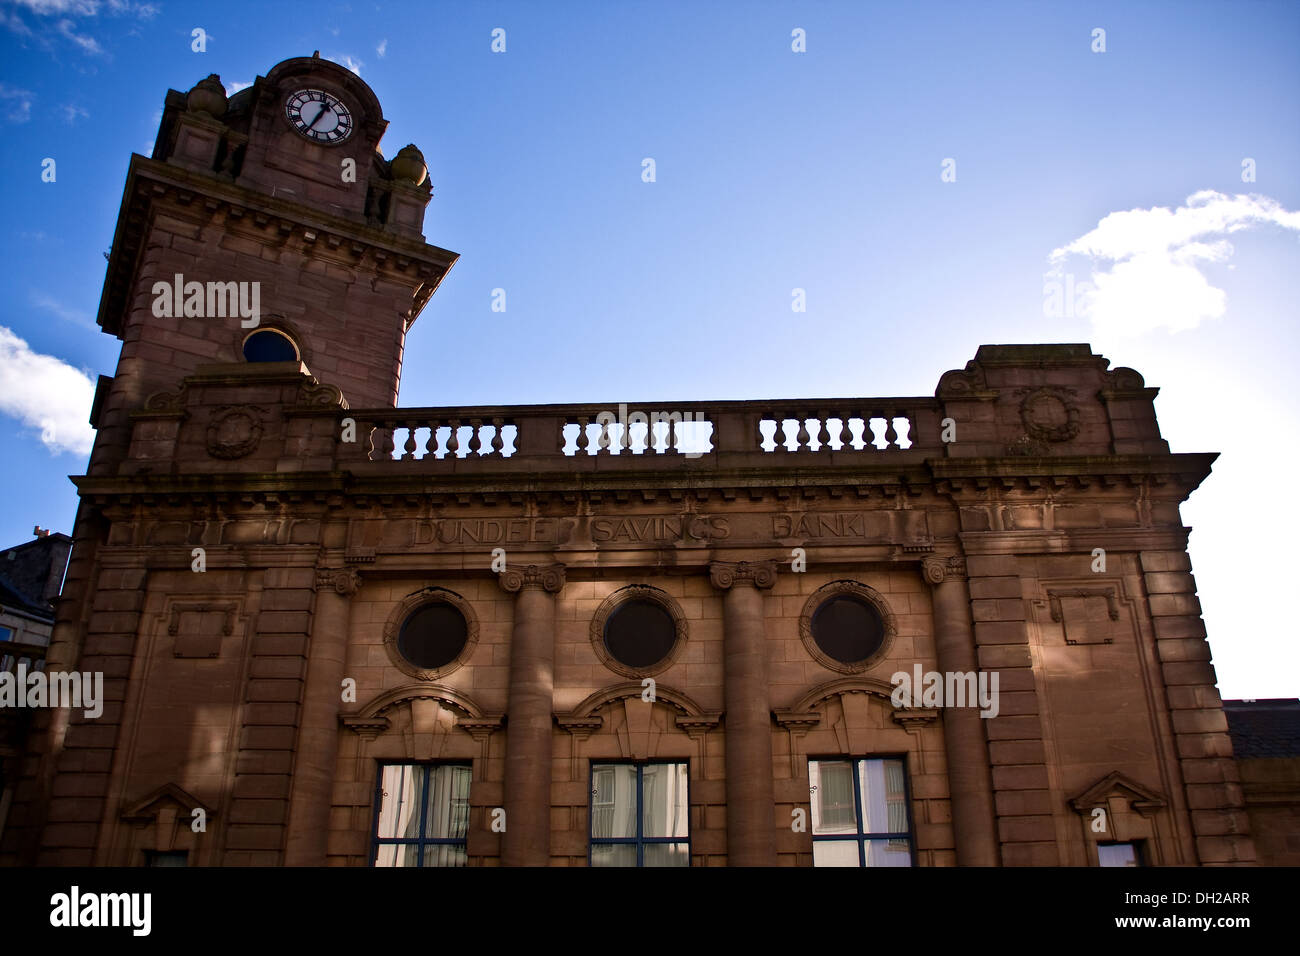 Dundee Savings Bank is a heavy Edwardian Baroque building with an oversize clock tower and was Built by David Baxter in 1914, UK Stock Photo